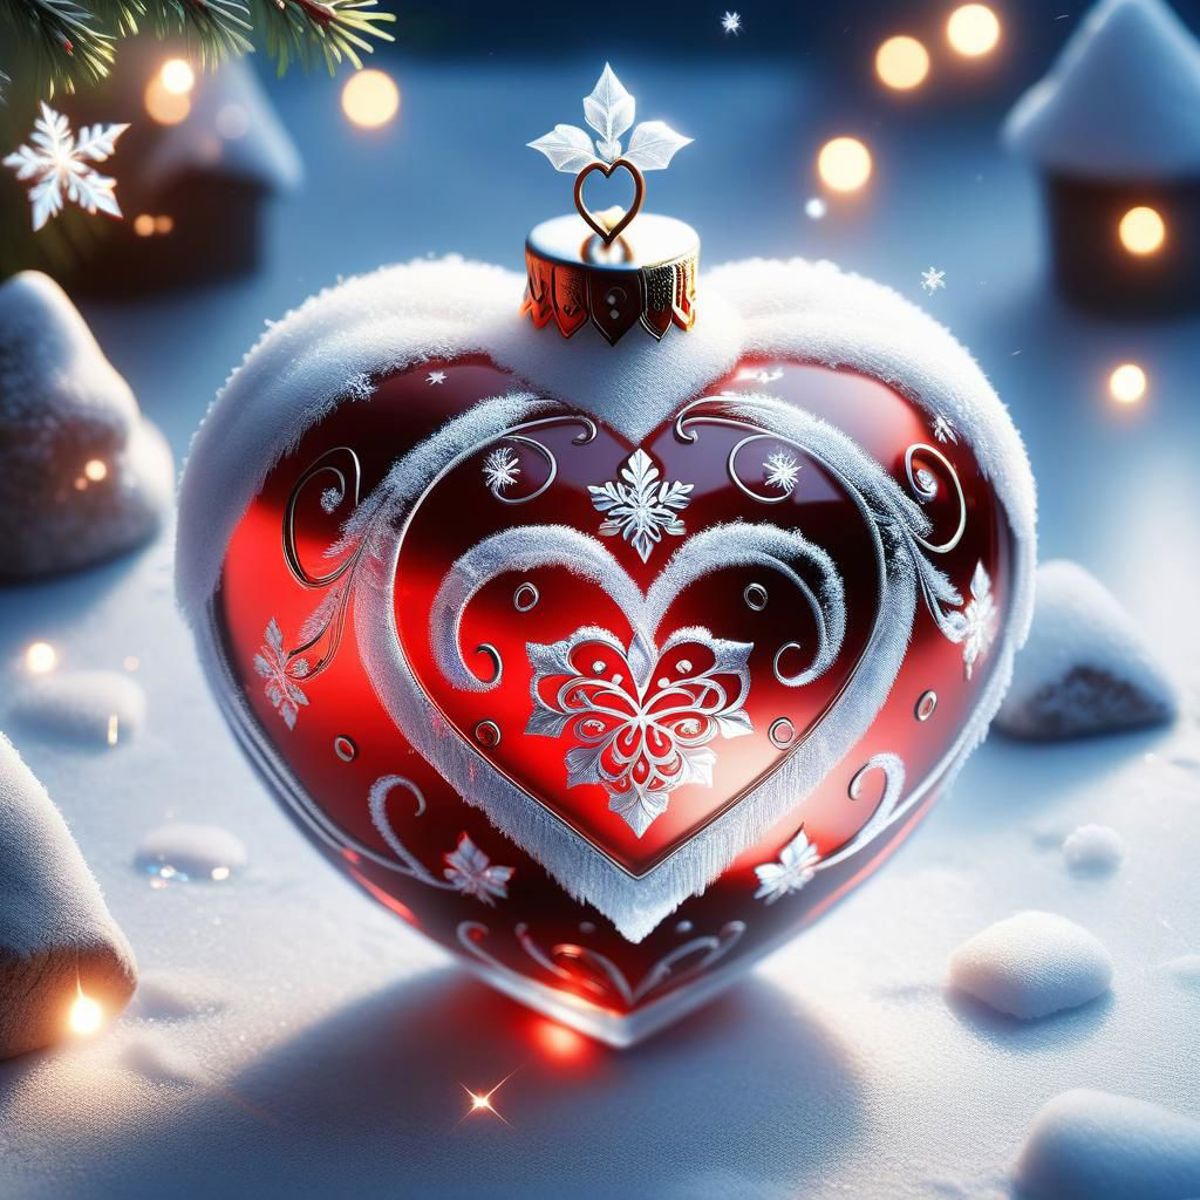 A decorated red heart ornament on a snowy surface.